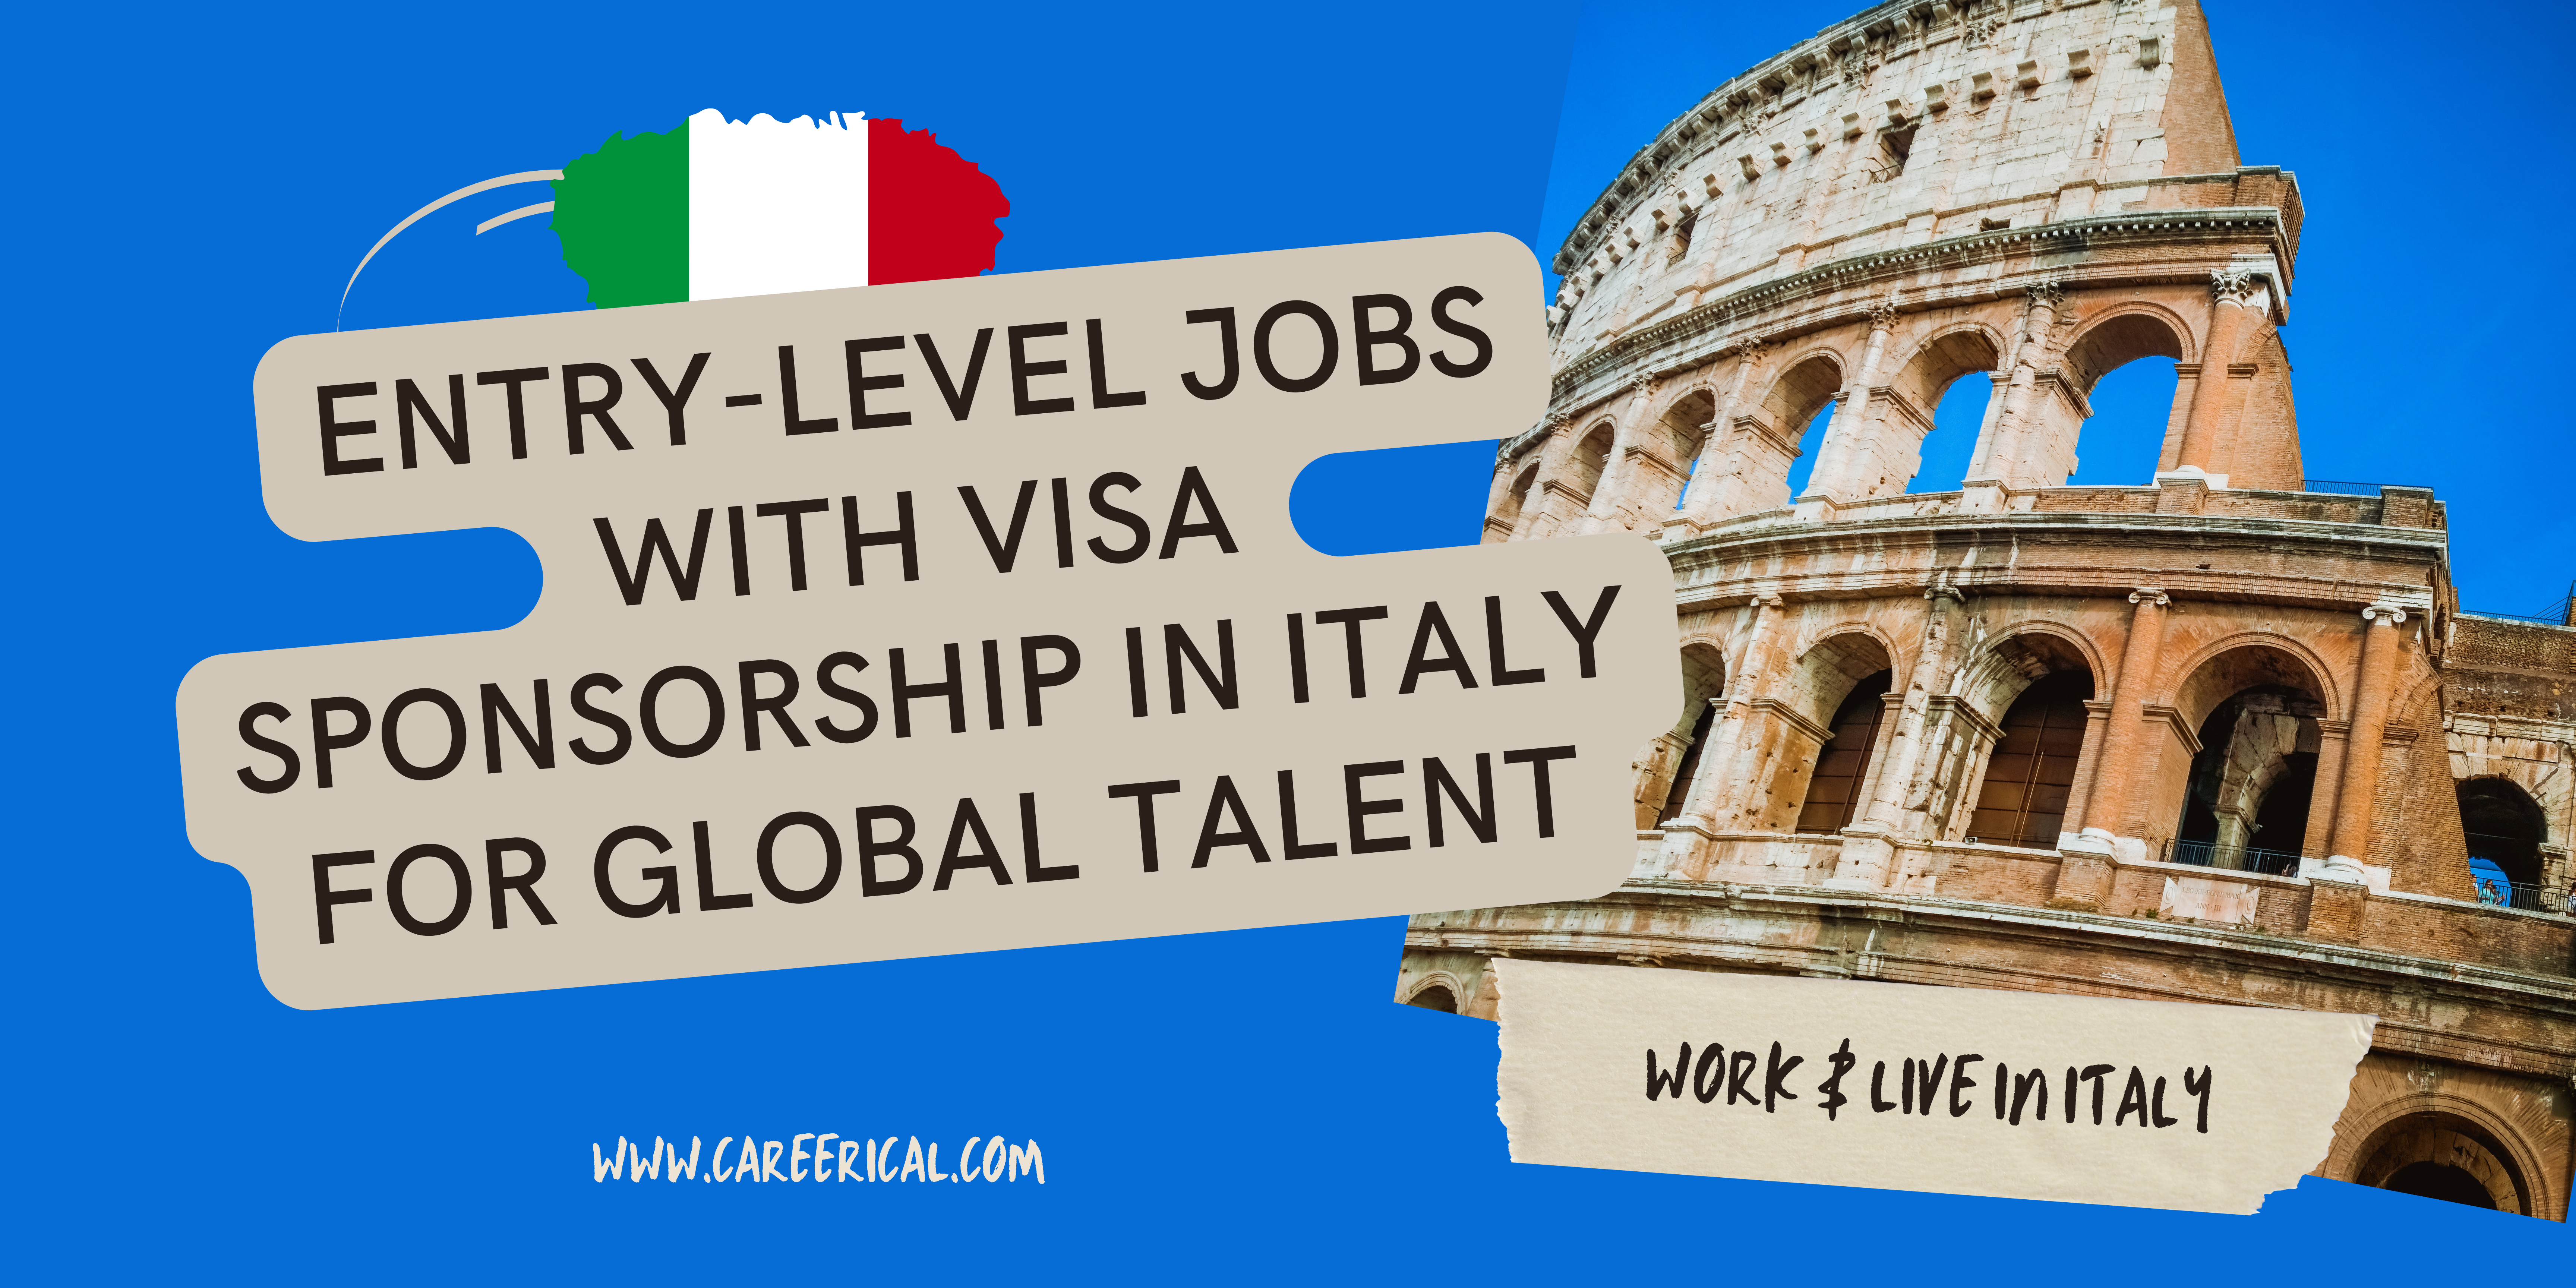 Entry-Level Jobs with Visa Sponsorship in Italy for Global Talent